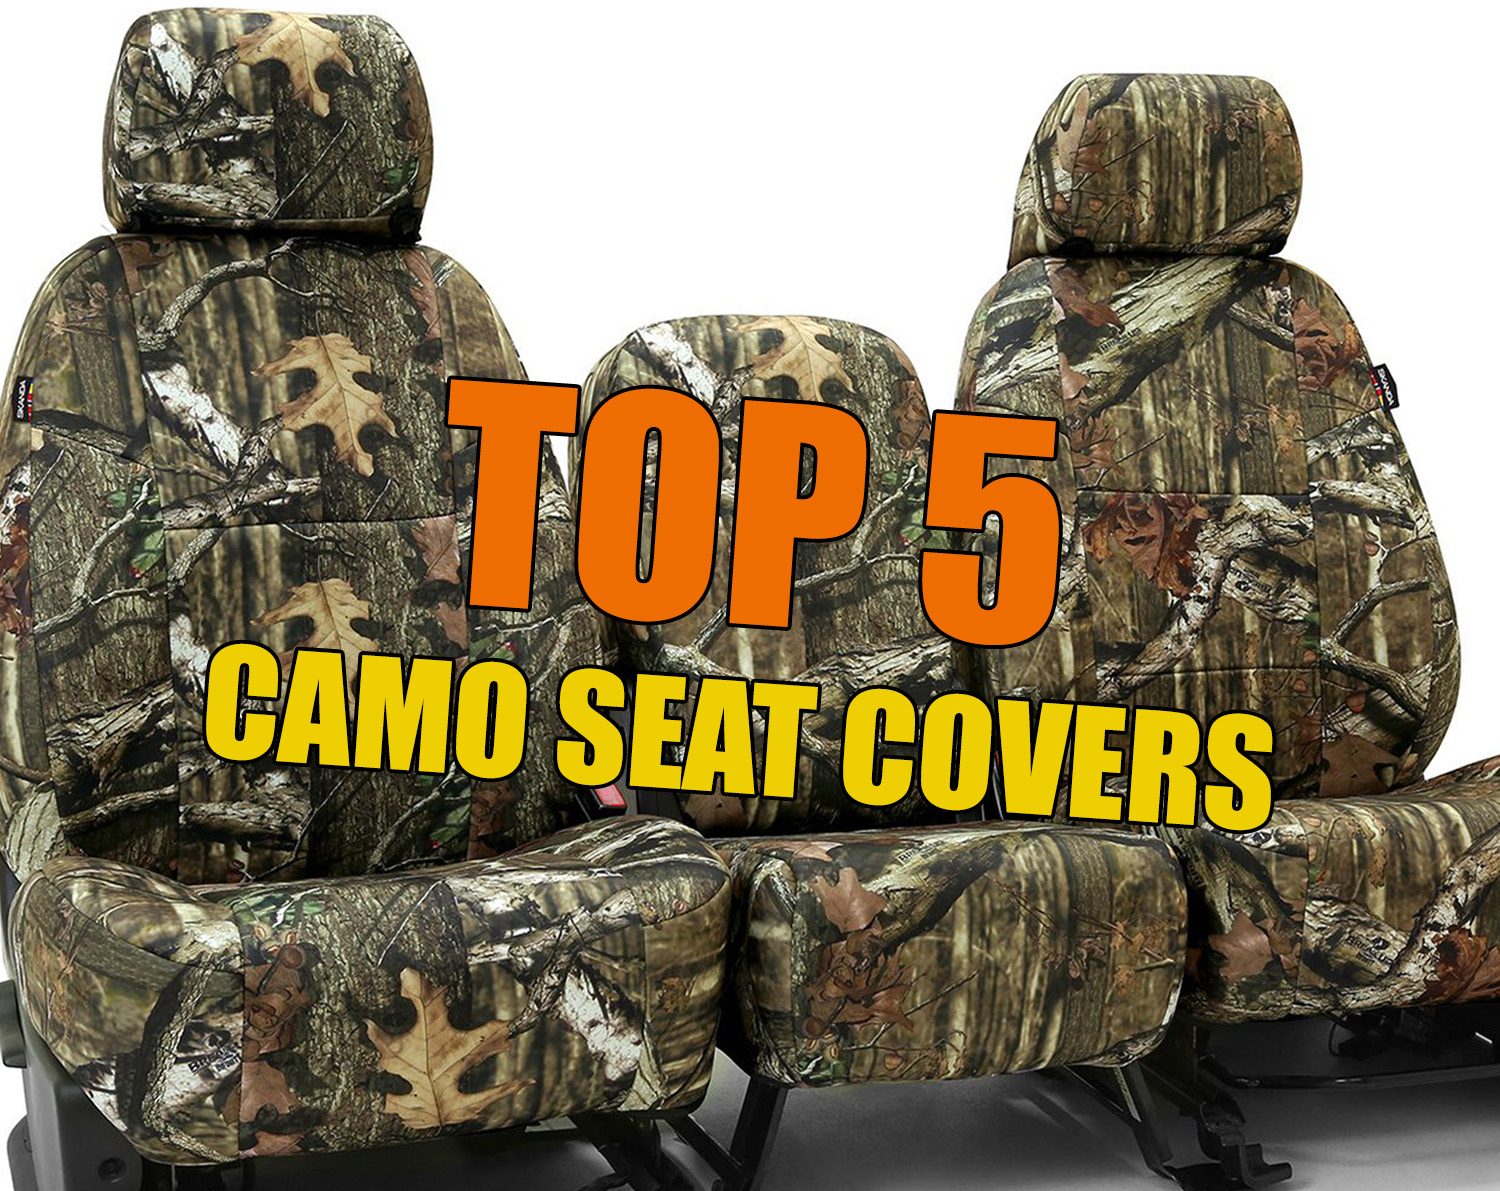 Top 5 Camo Seat Covers